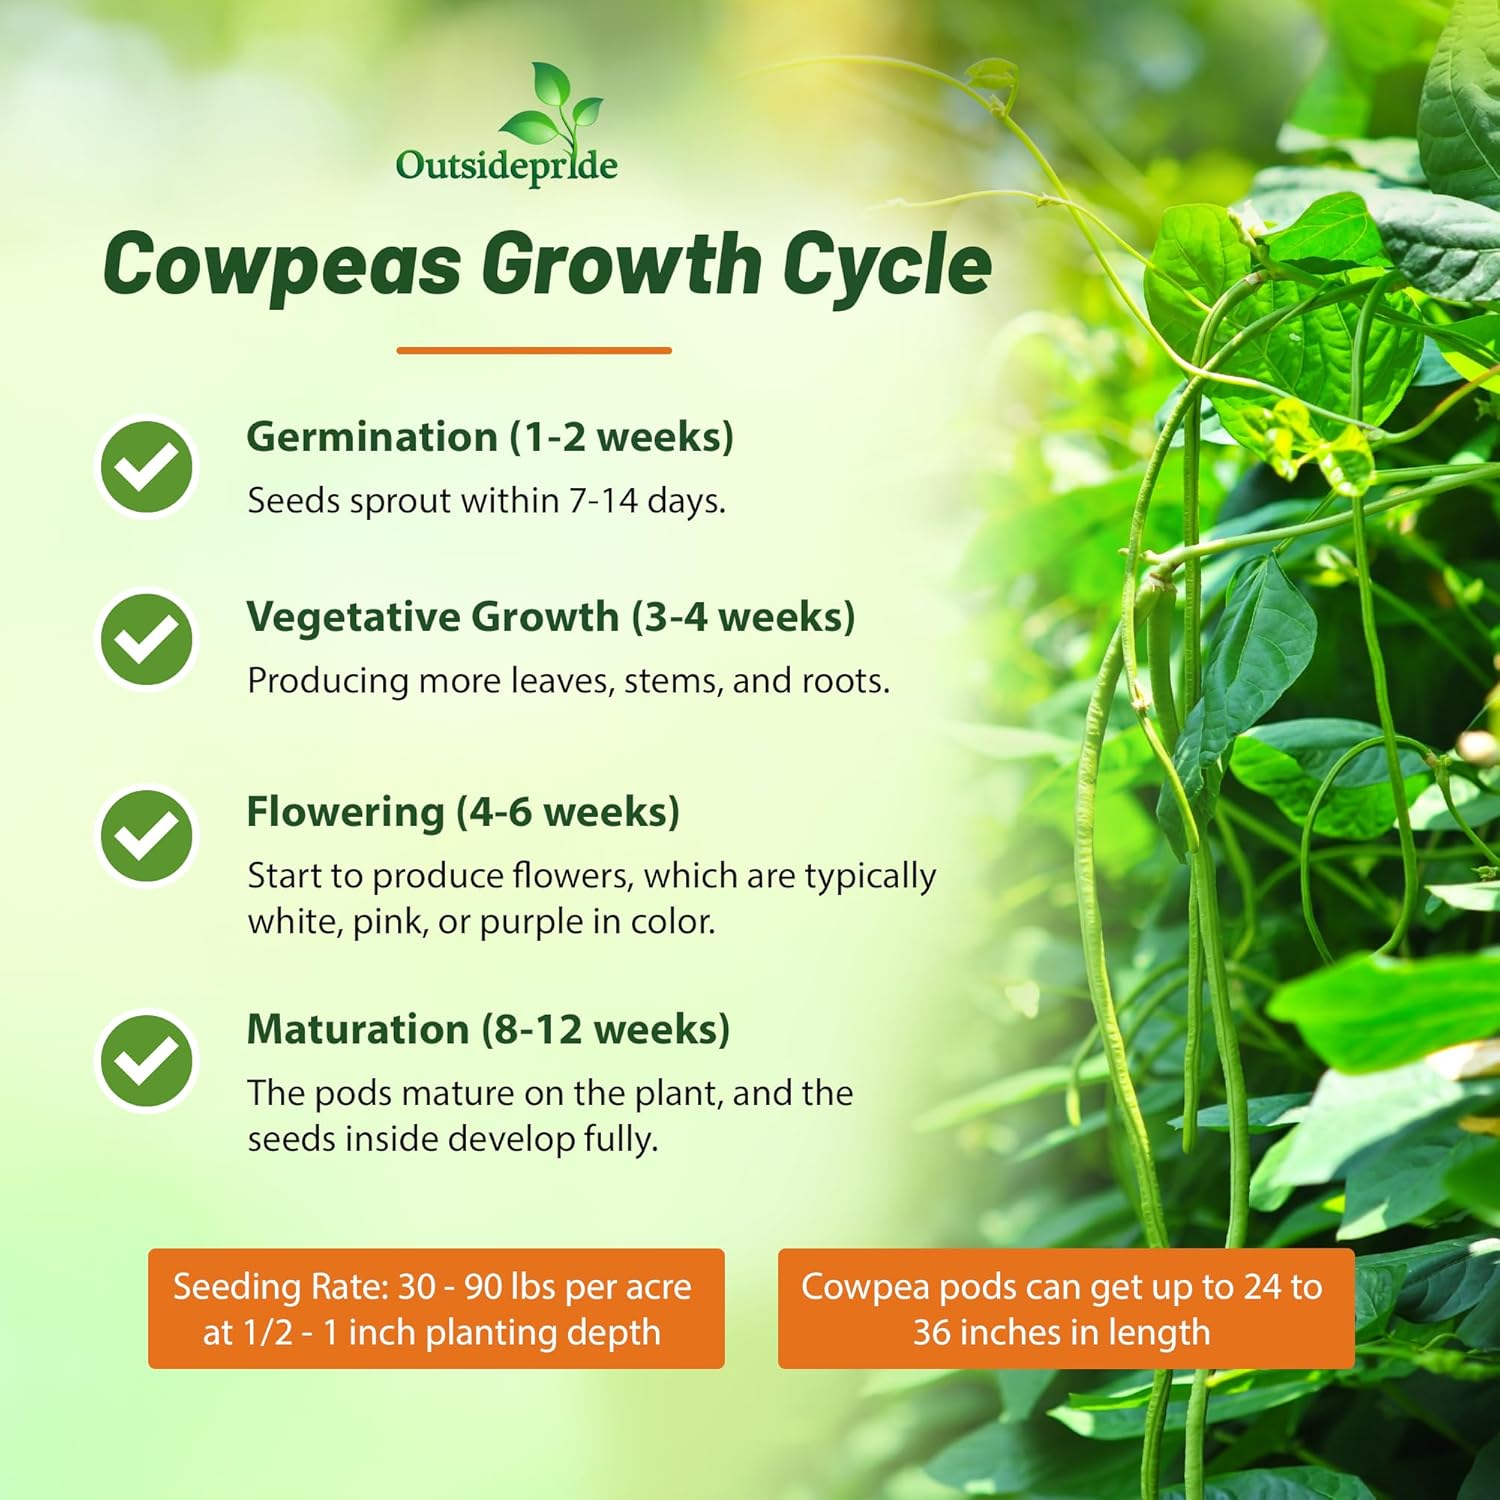 Cowpeas Growth Cycle